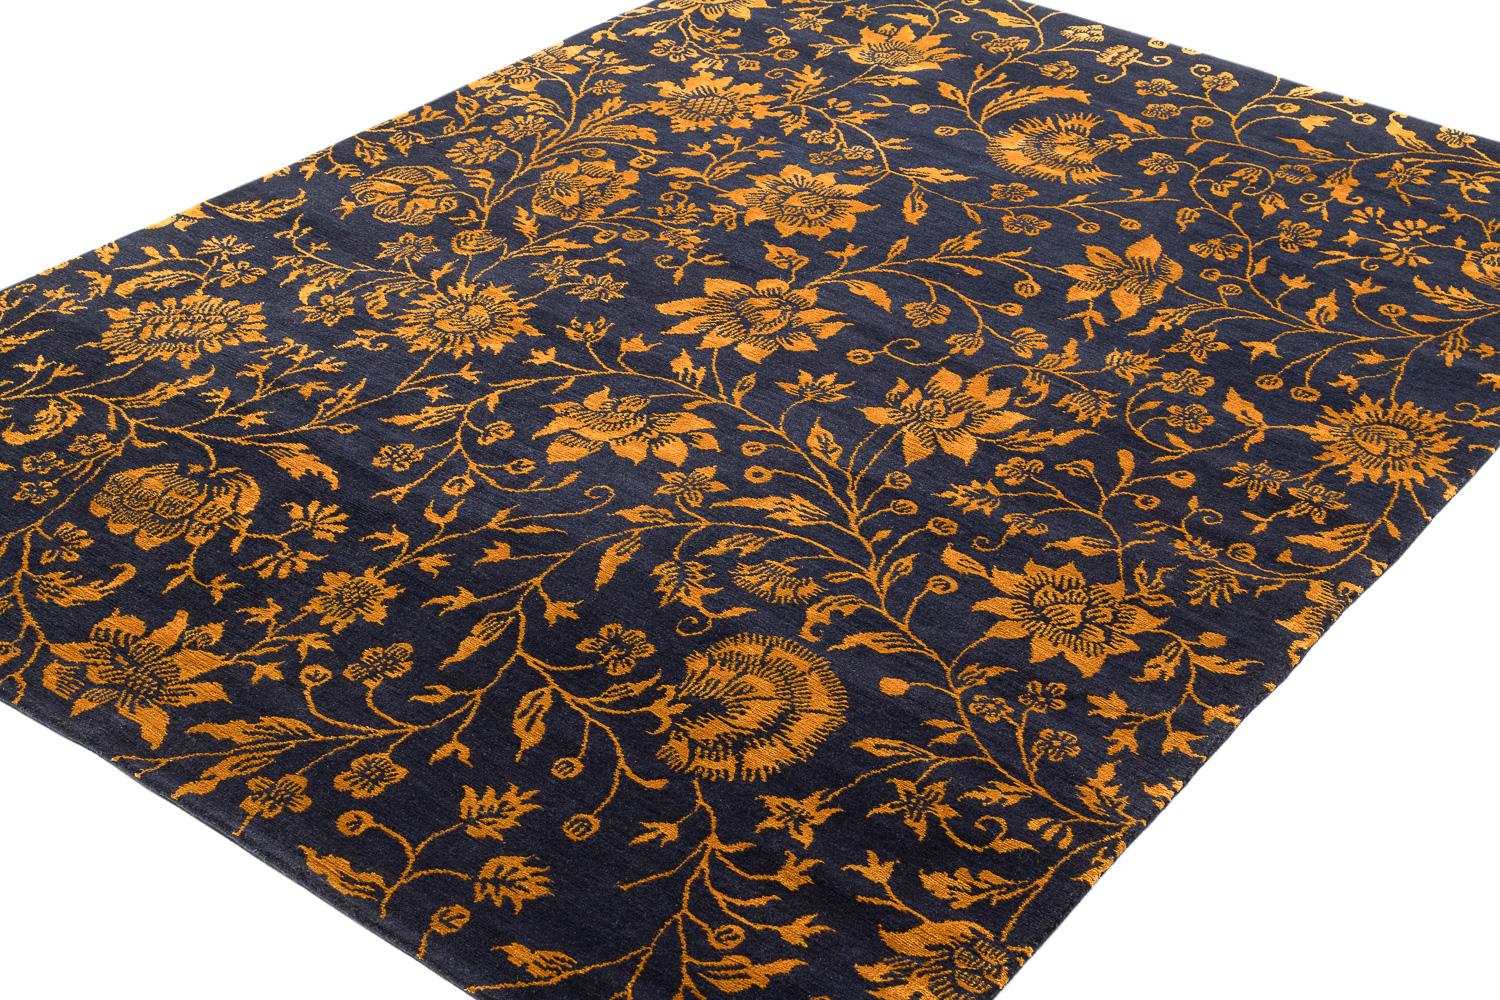 Nepalese Deep Navy Blue and Gold Traditional Floral Rug